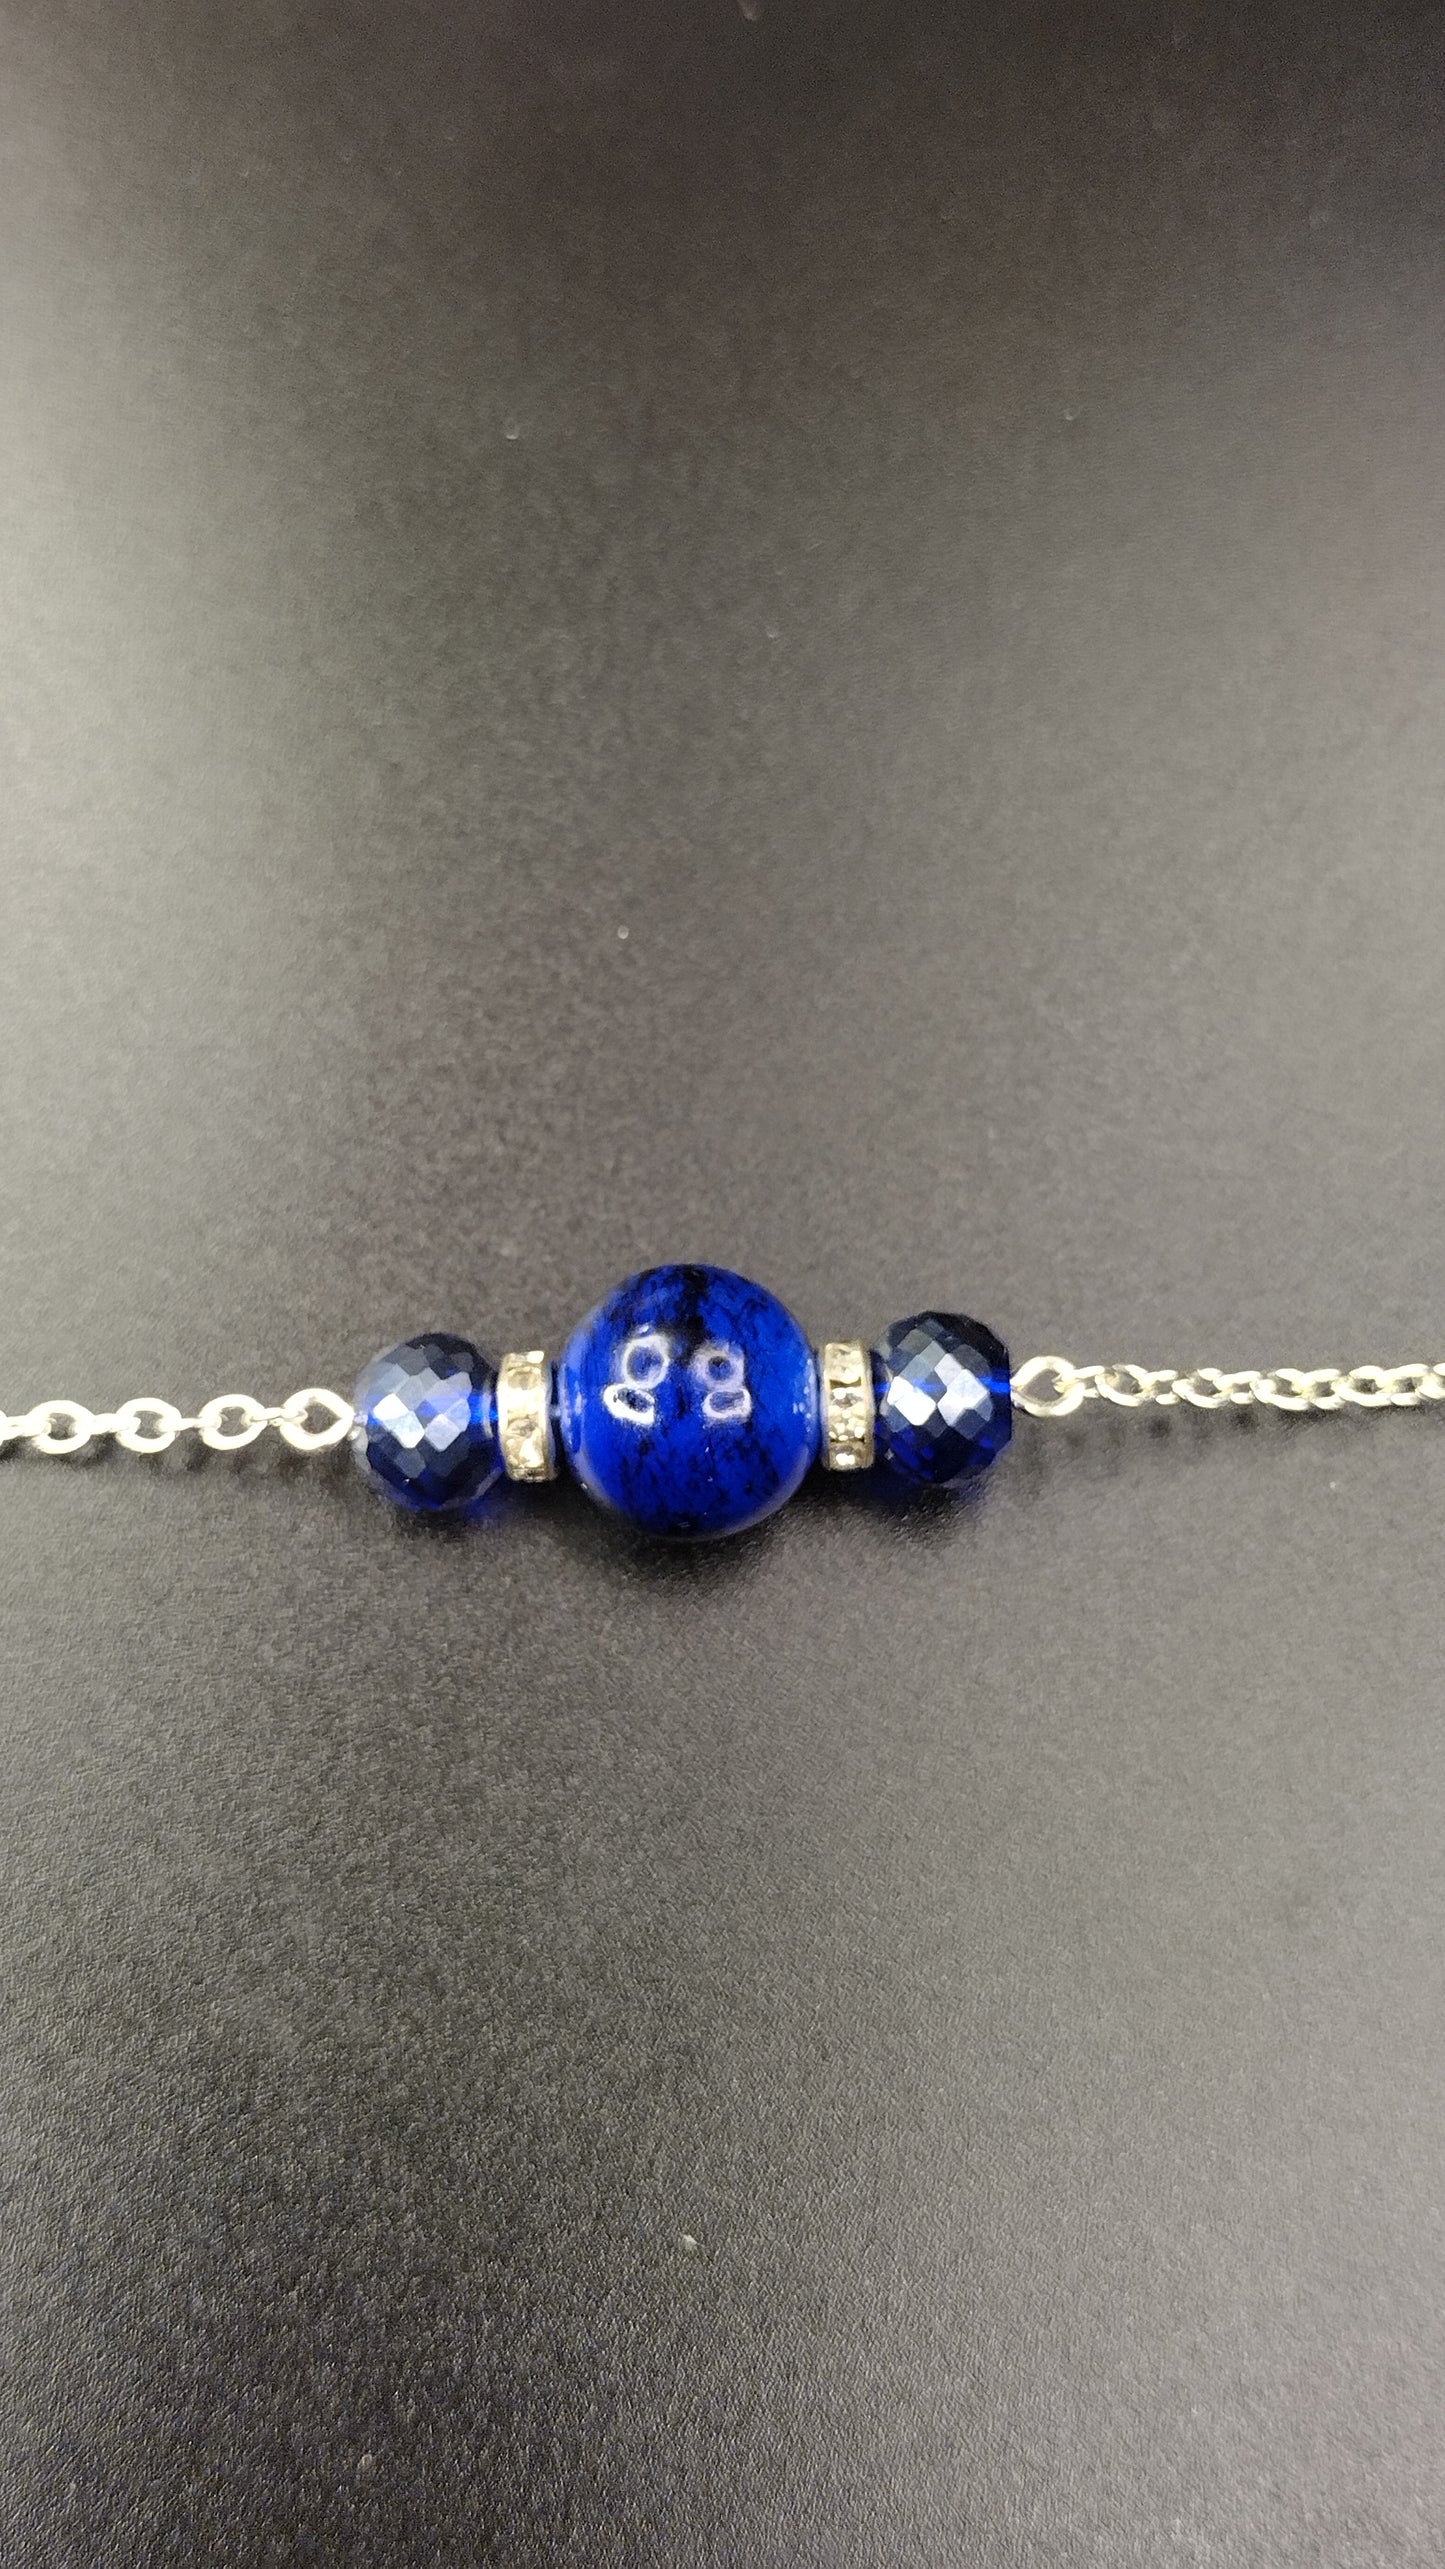 Blue Crystal Bar Necklace Pretty Pineapple Bead Pretty Pineapple Bead